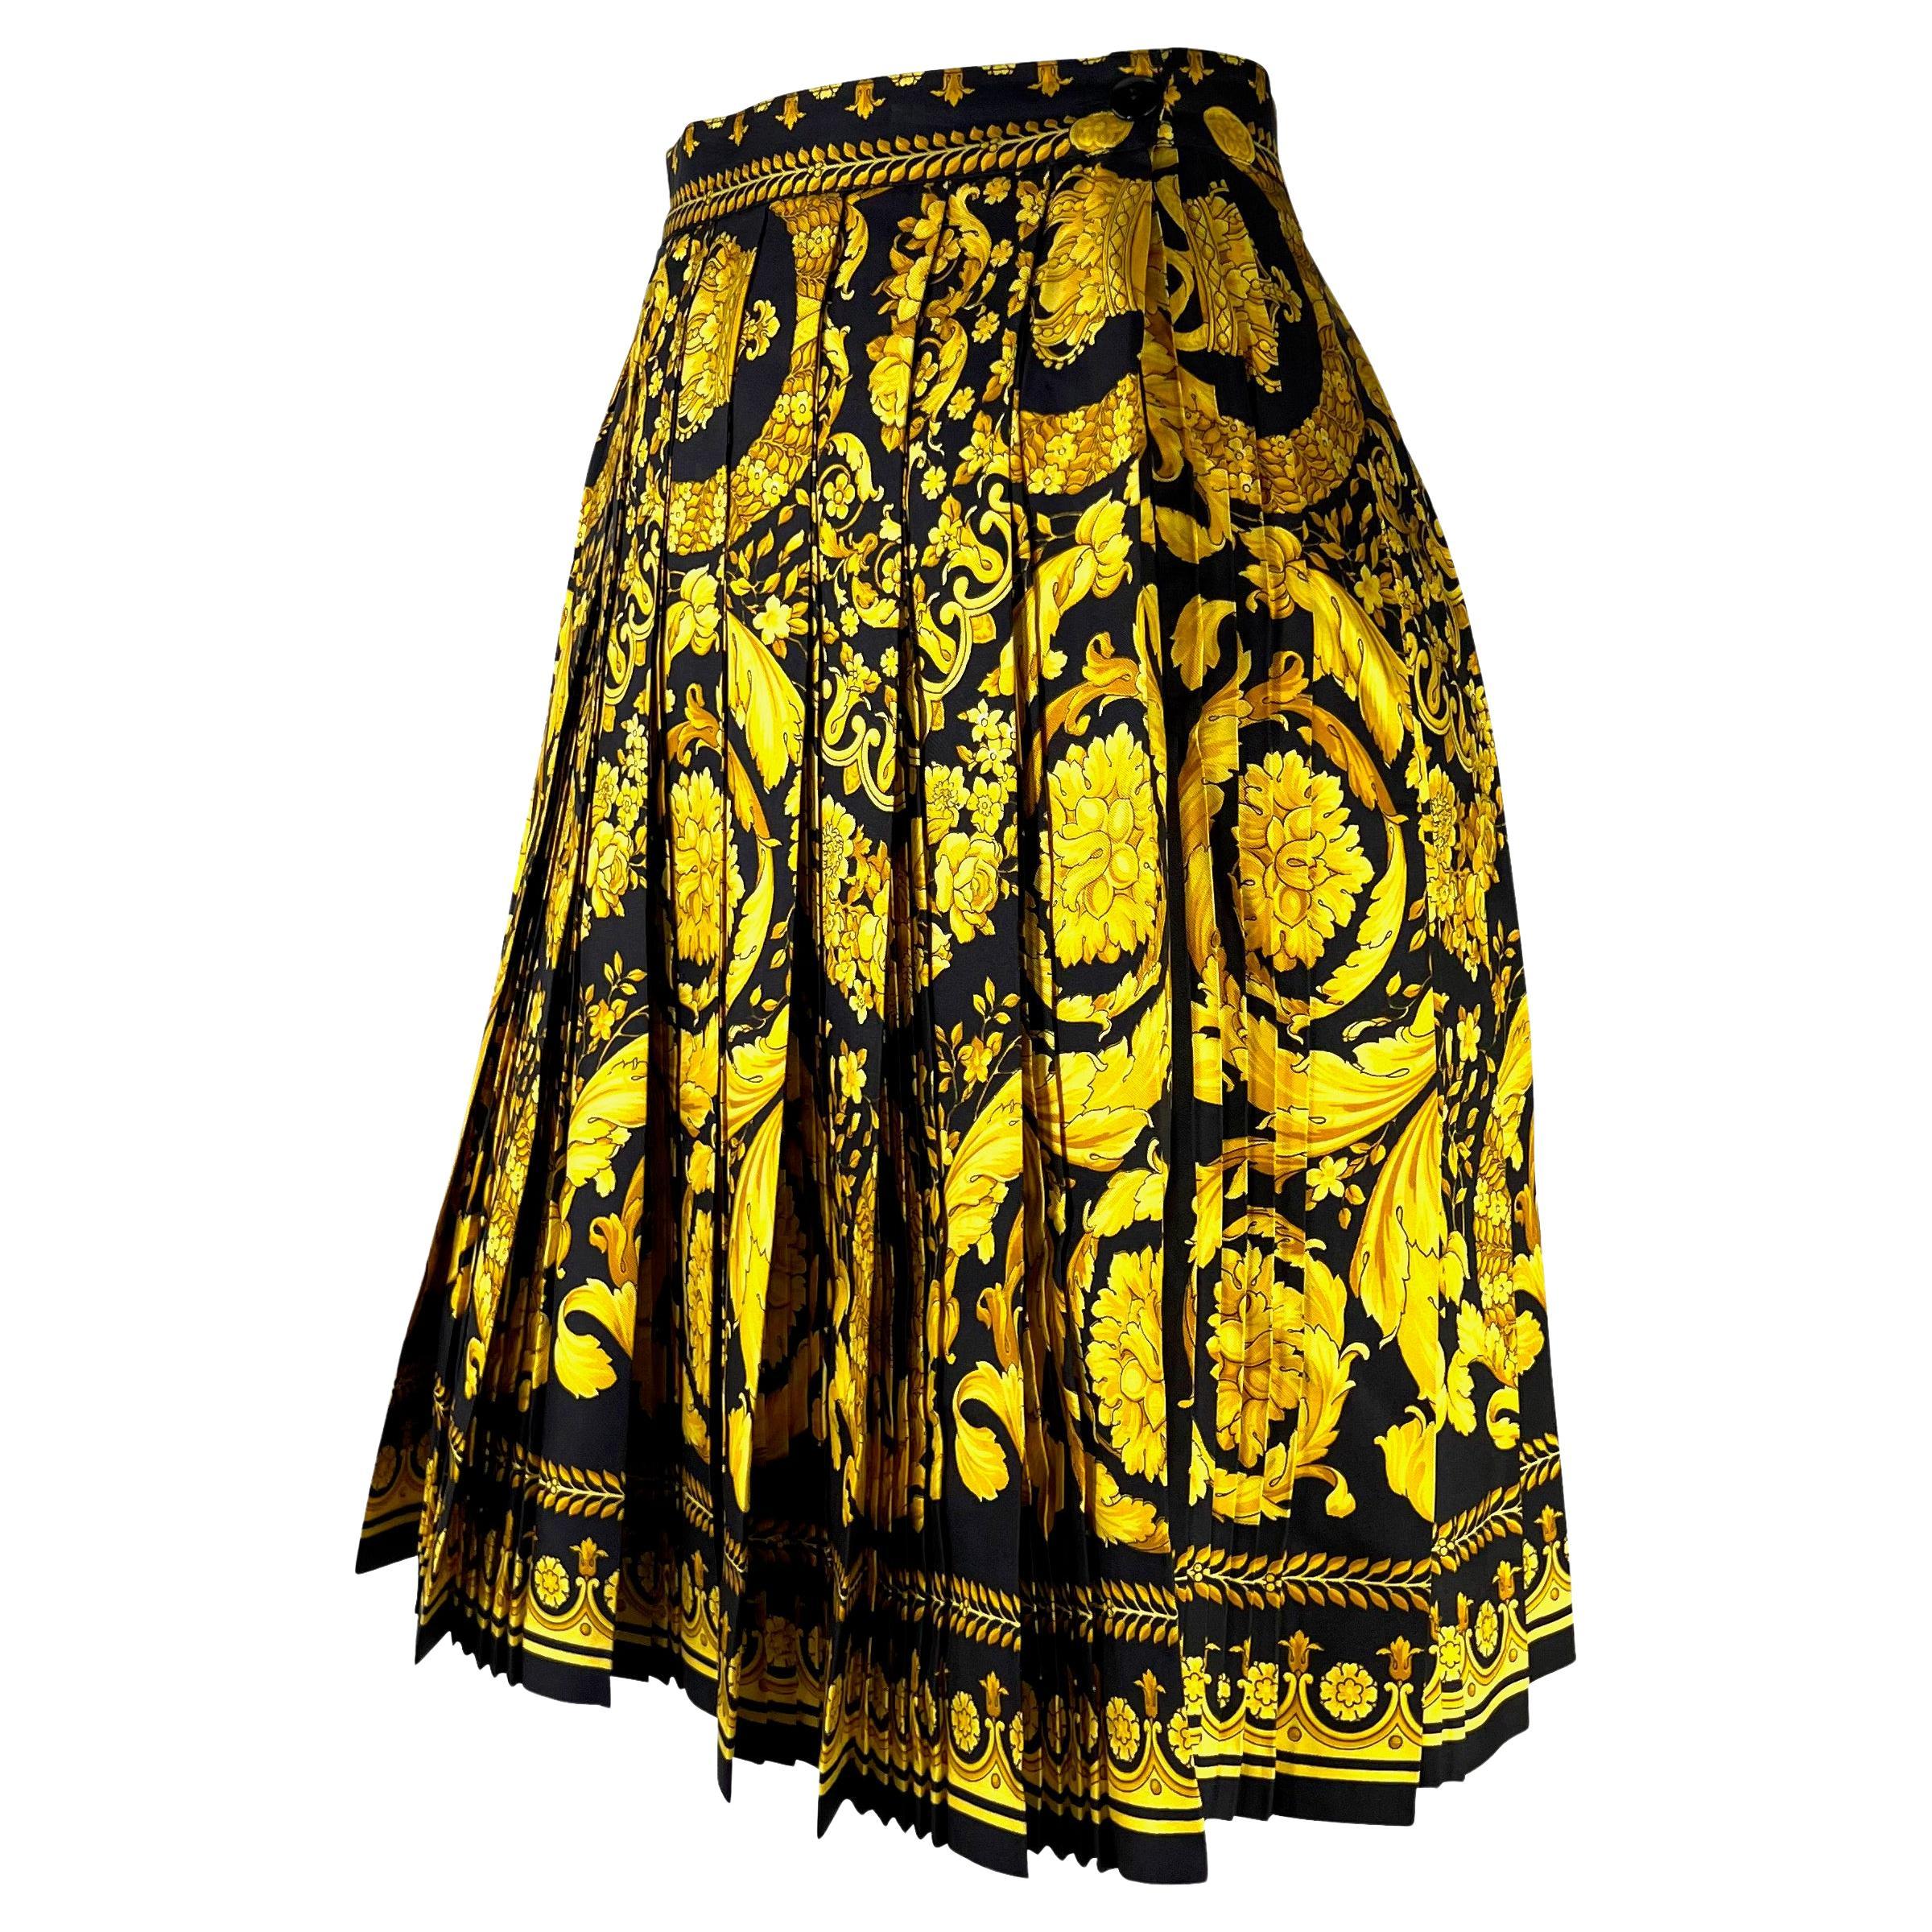 Presenting a classic gold and black baroque print Gianni Versace Couture skirt, designed by Gianni Versace. From Spring/Summer 1992, this pleated skirt boasts the brand's iconic baroque print. 

Approximate measurements:
Size - IT44 / US10
30